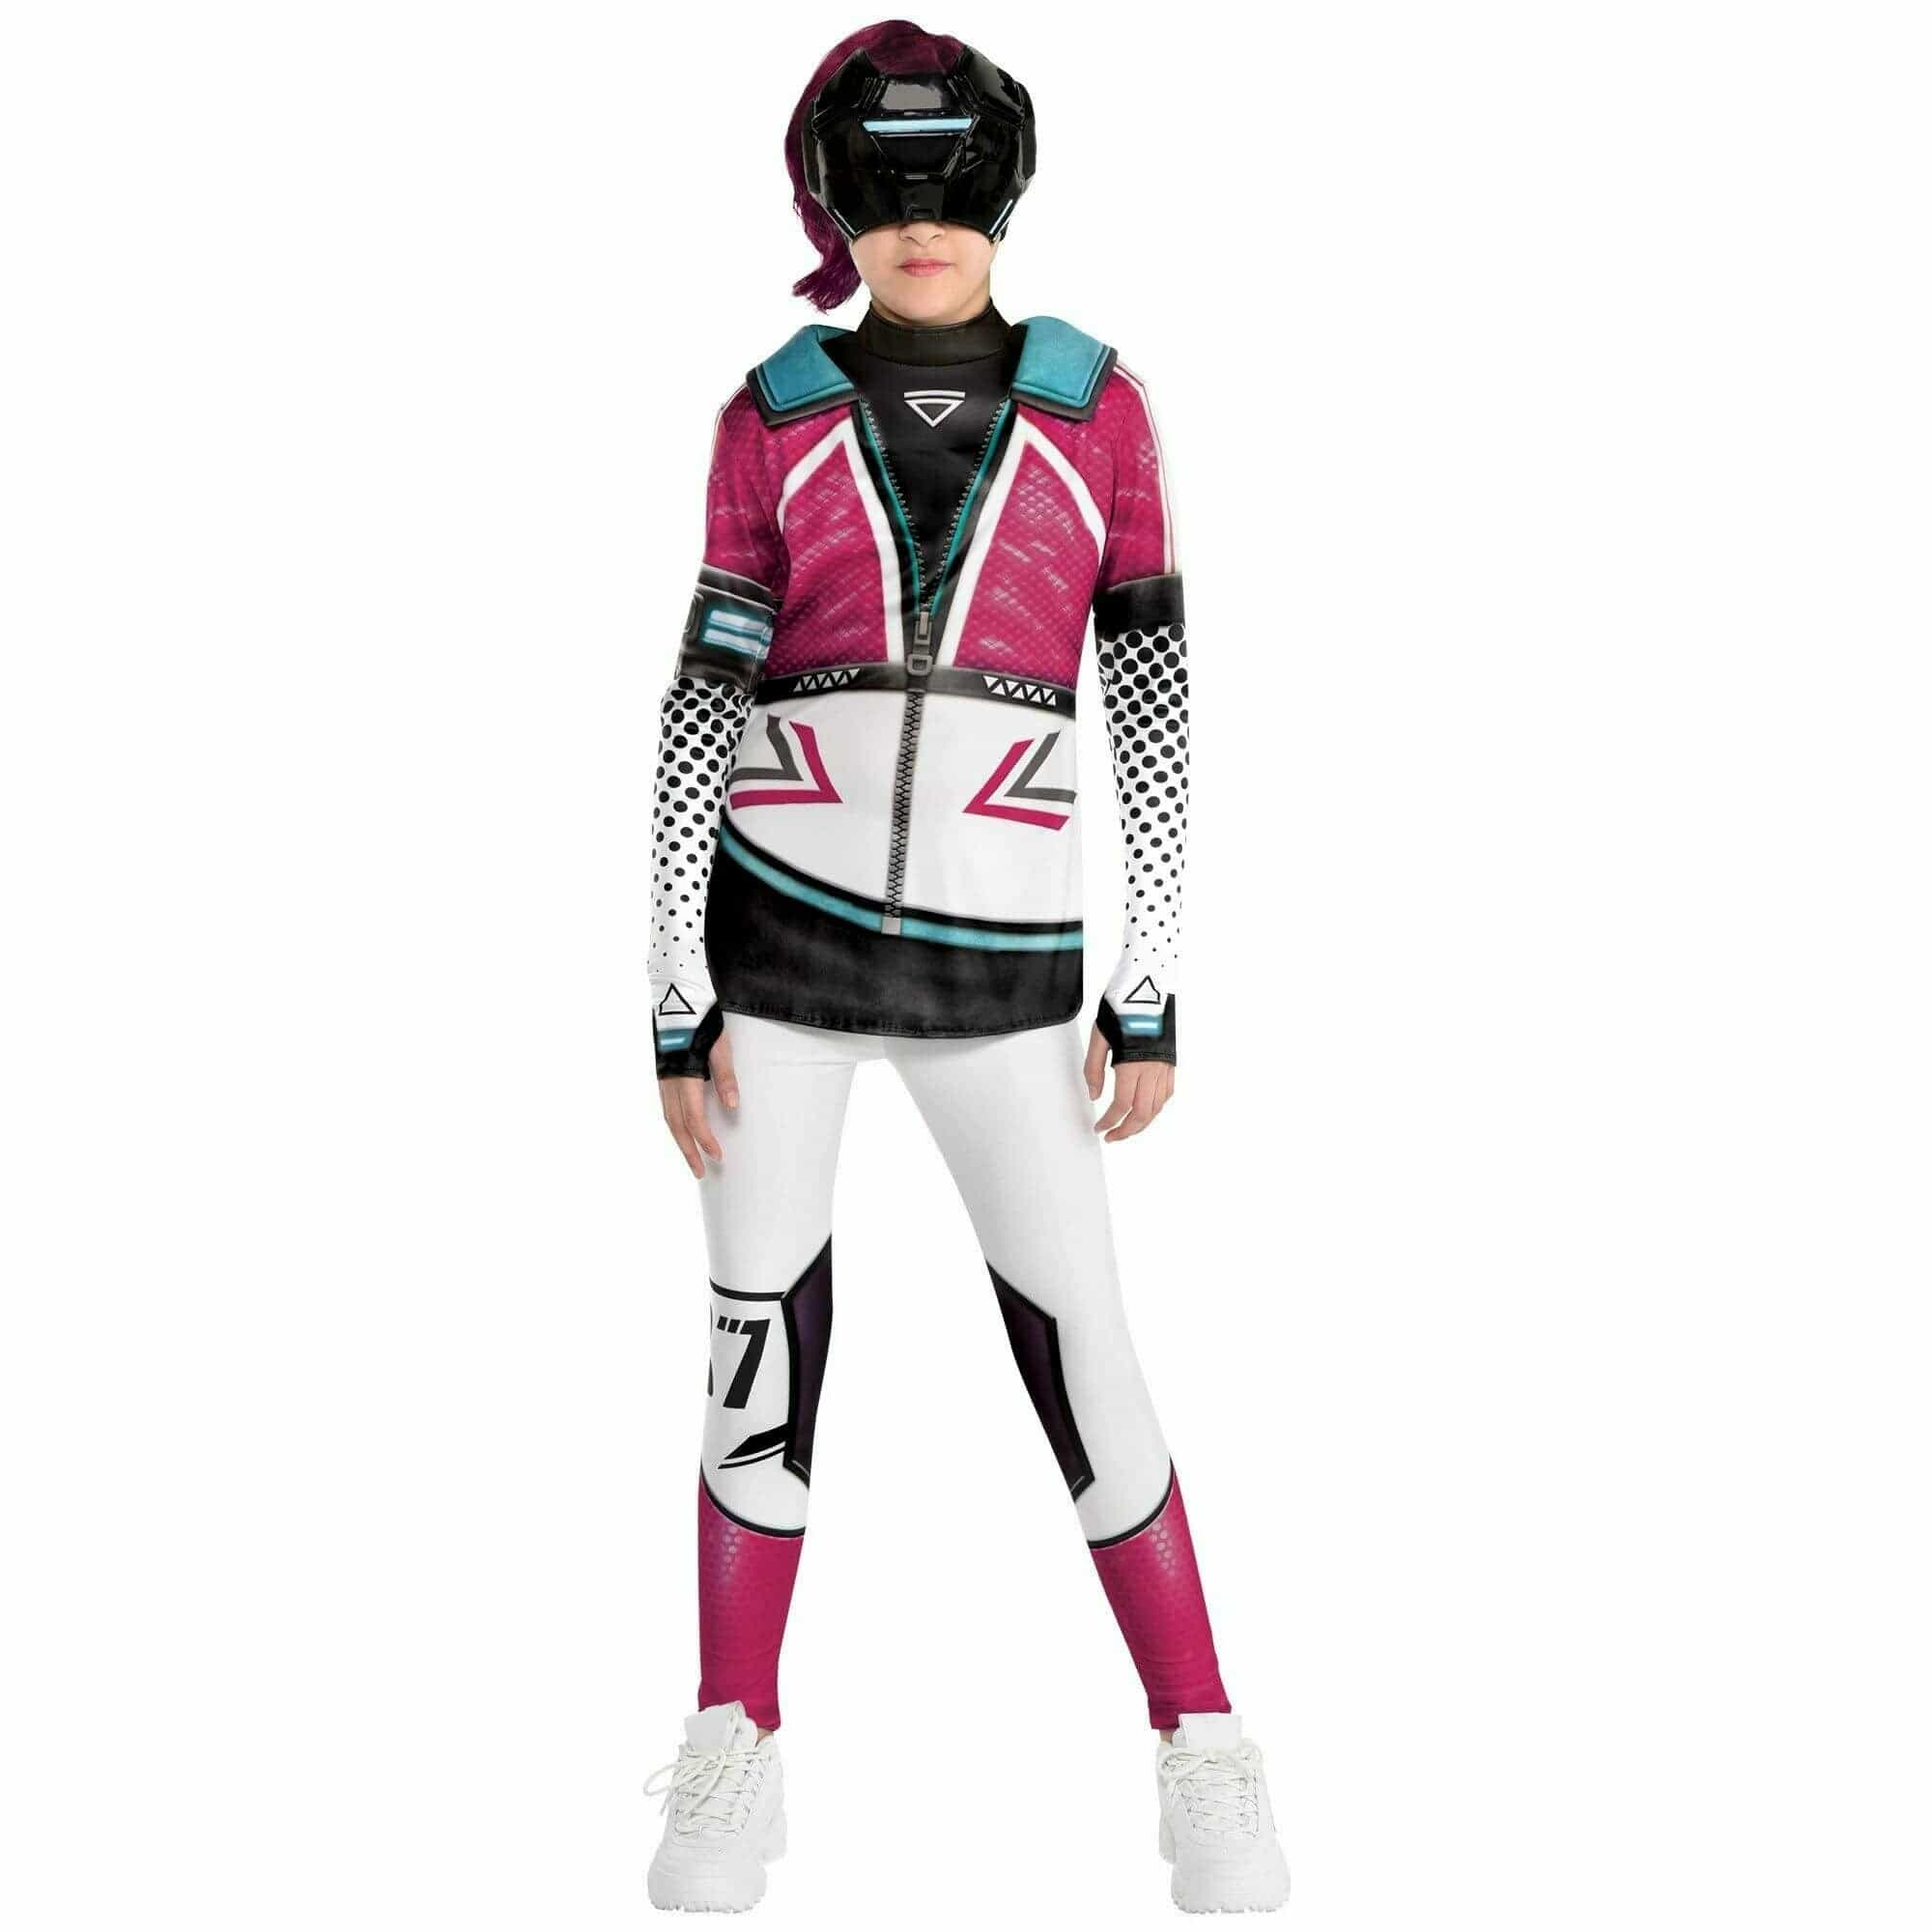 Amscan COSTUMES X-Large (14-16) CLEARANCE - Girls Hyperscape: Amandine Costume